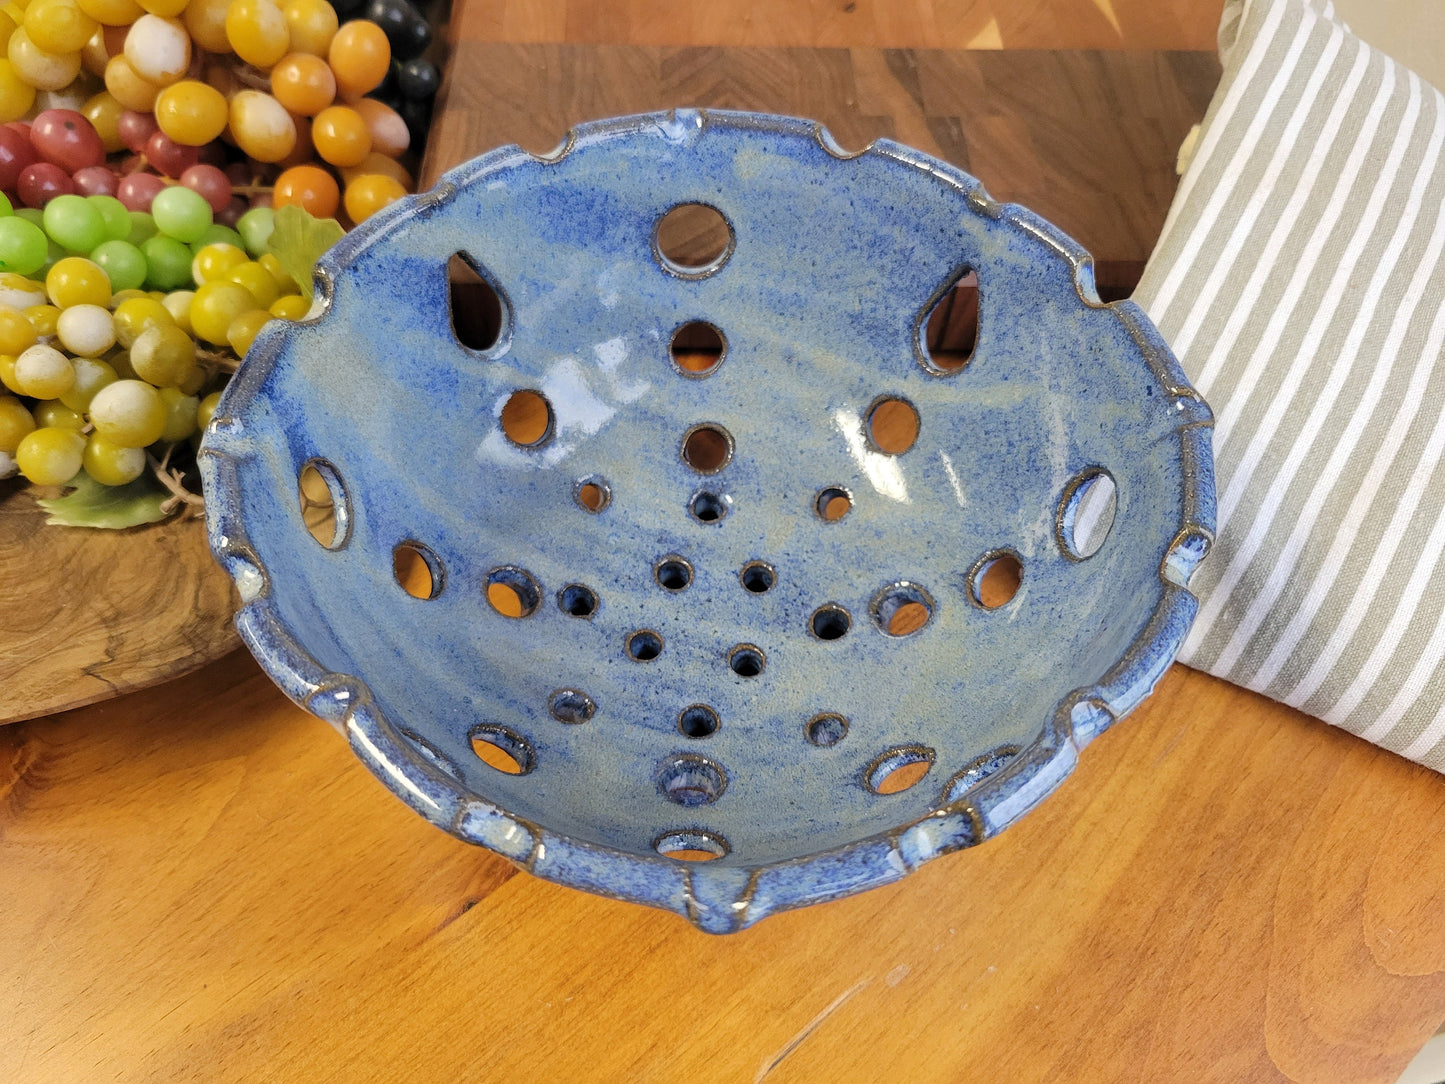 Squared Berry Colander Rinse Bowl Ceramic - Handmade Pottery Strainer Basket for Washing Fruit in Variegated Blue